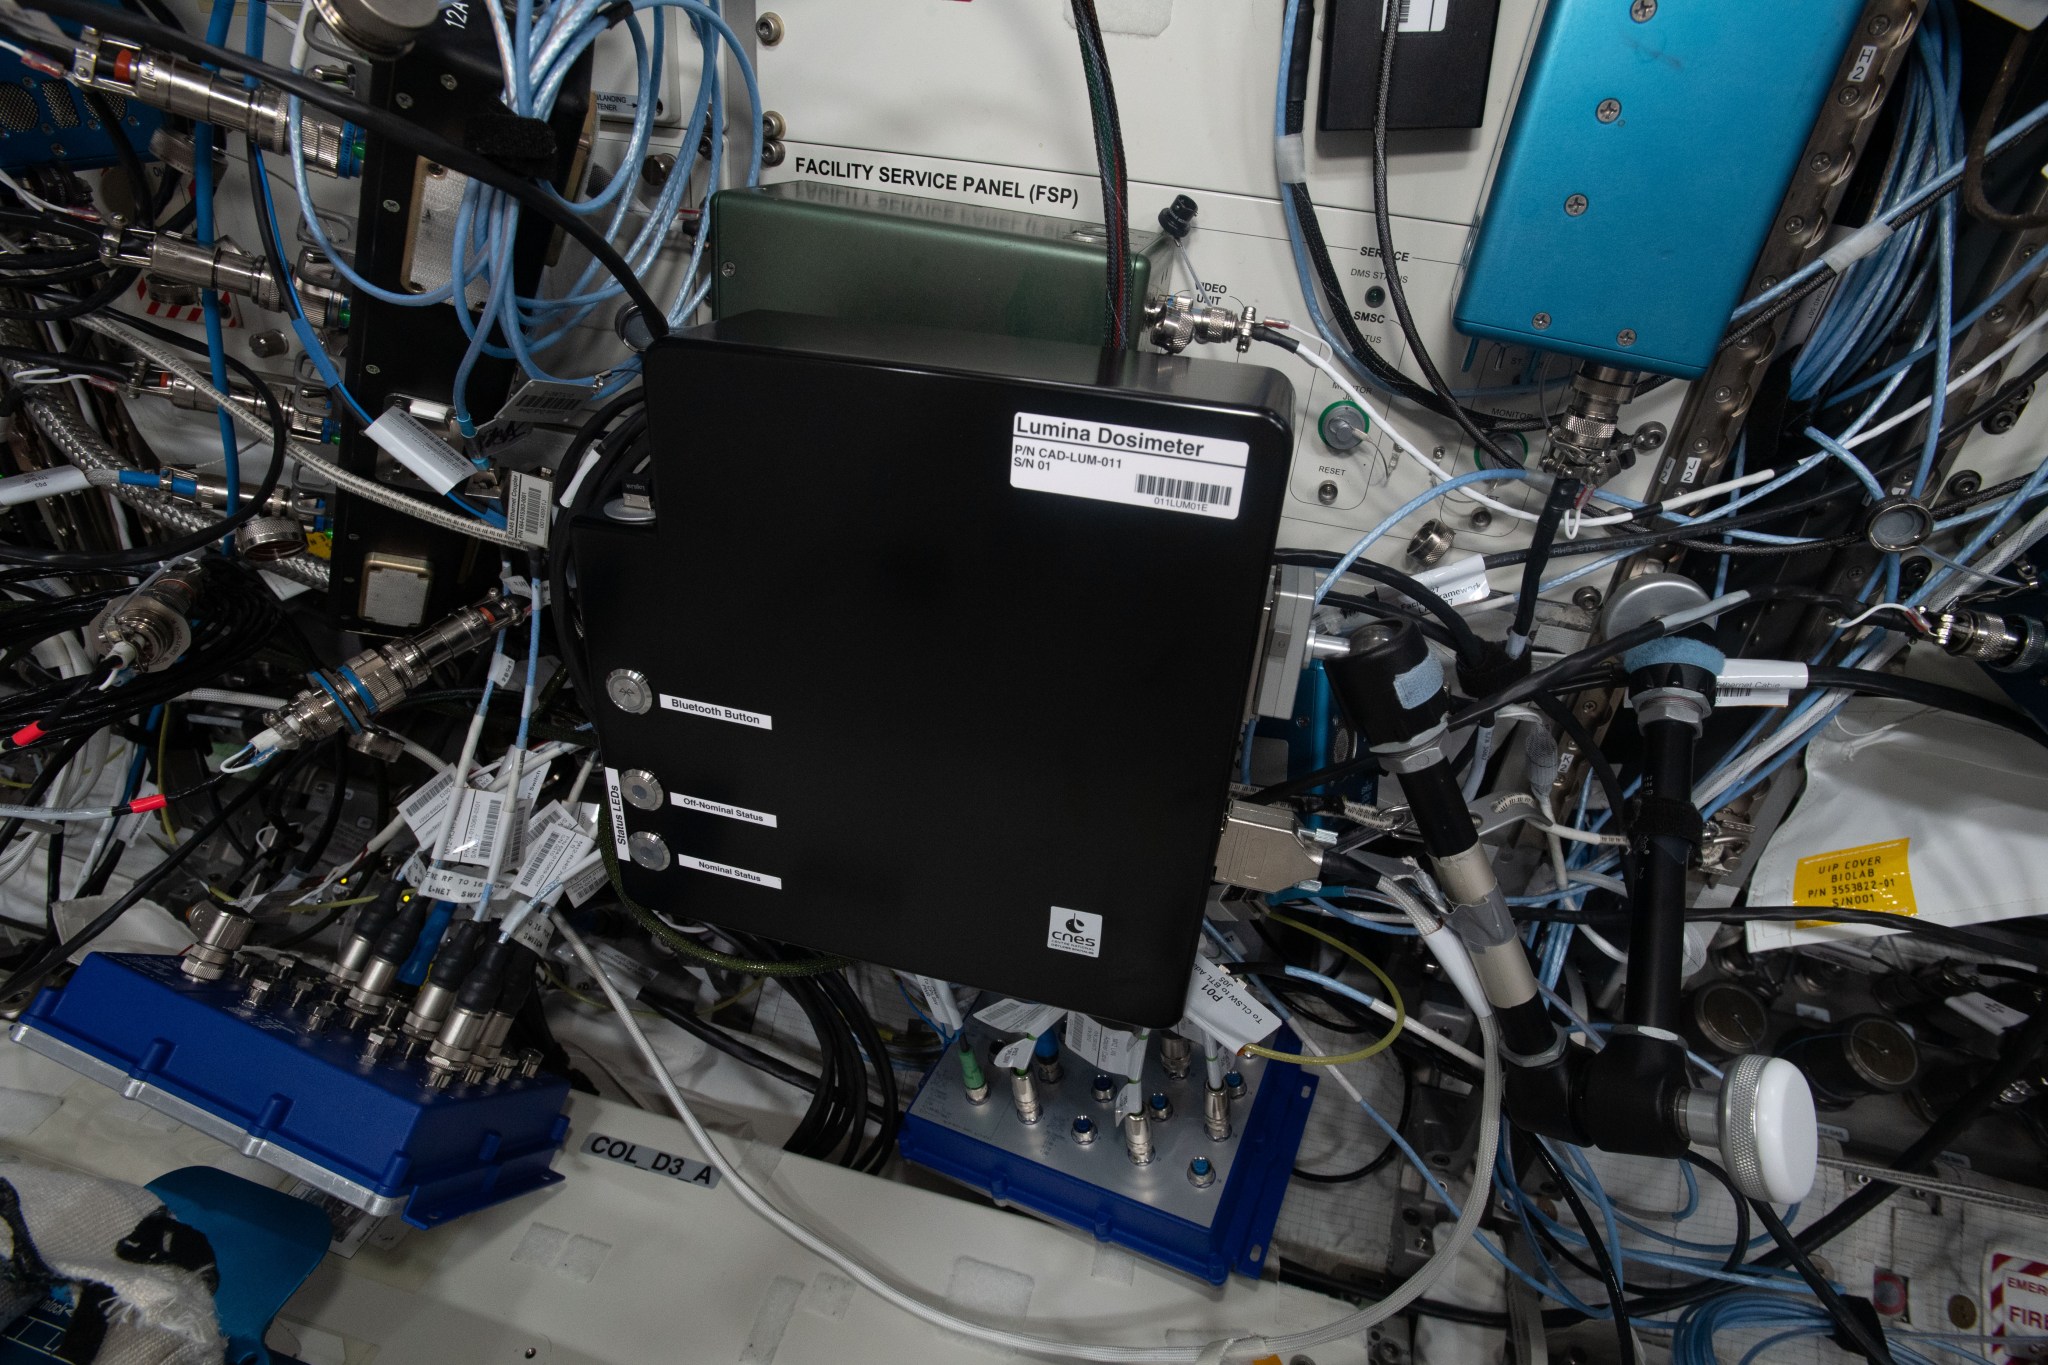 image of experiment hardware and cable connections